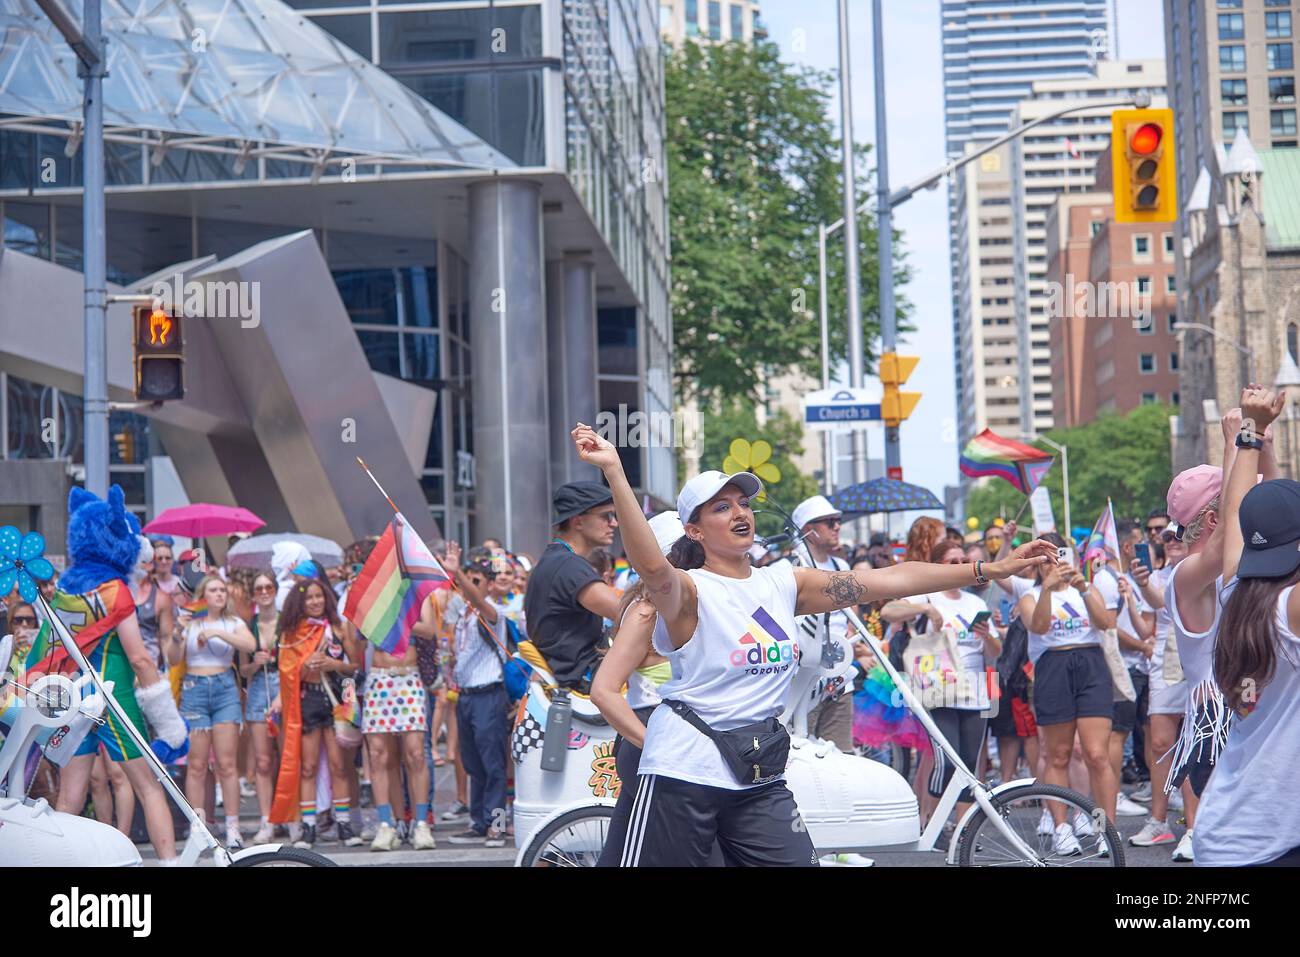 Toronto Ontario, Canada- June 26th, 2022: Adidas employees marching in Toronto’s annual Pride parade Stock Photo